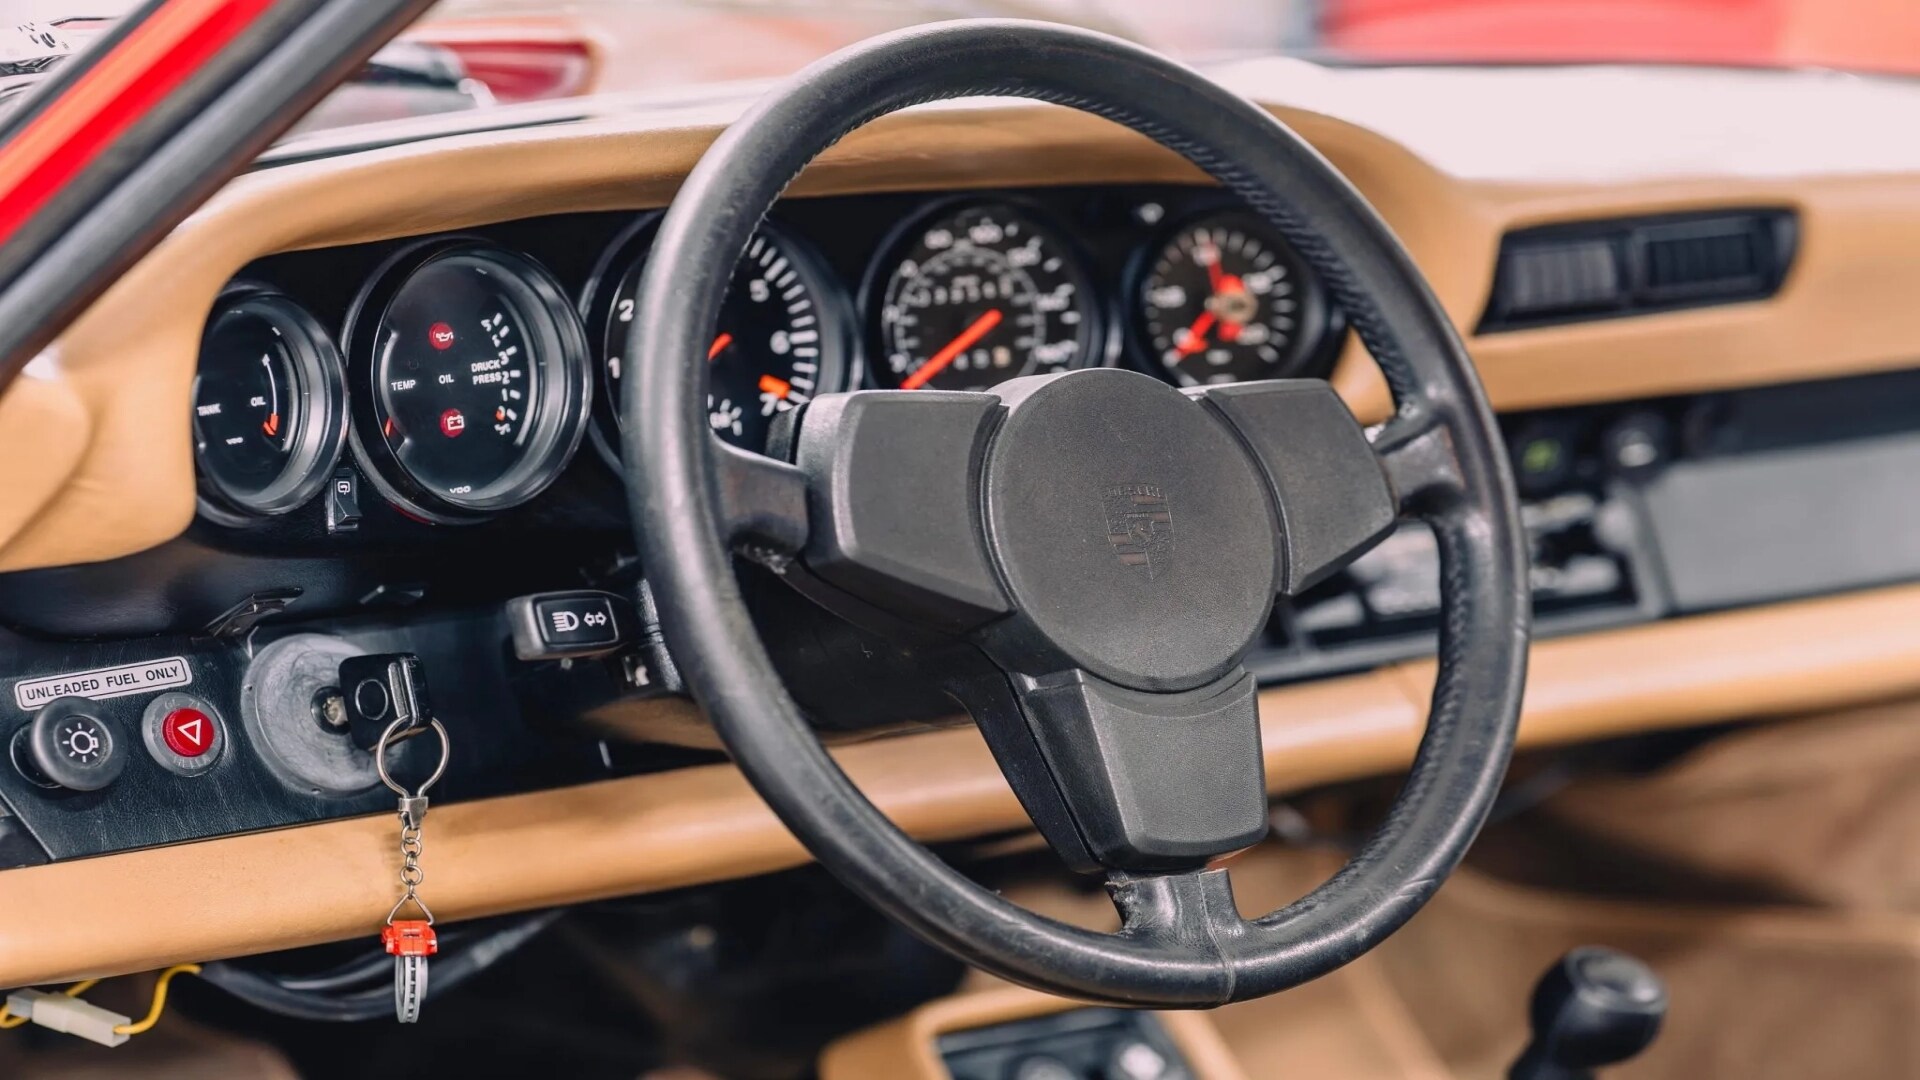 The Steering And Dashboard Of The 1982 Porsche 911 Turbo Thats's On Action